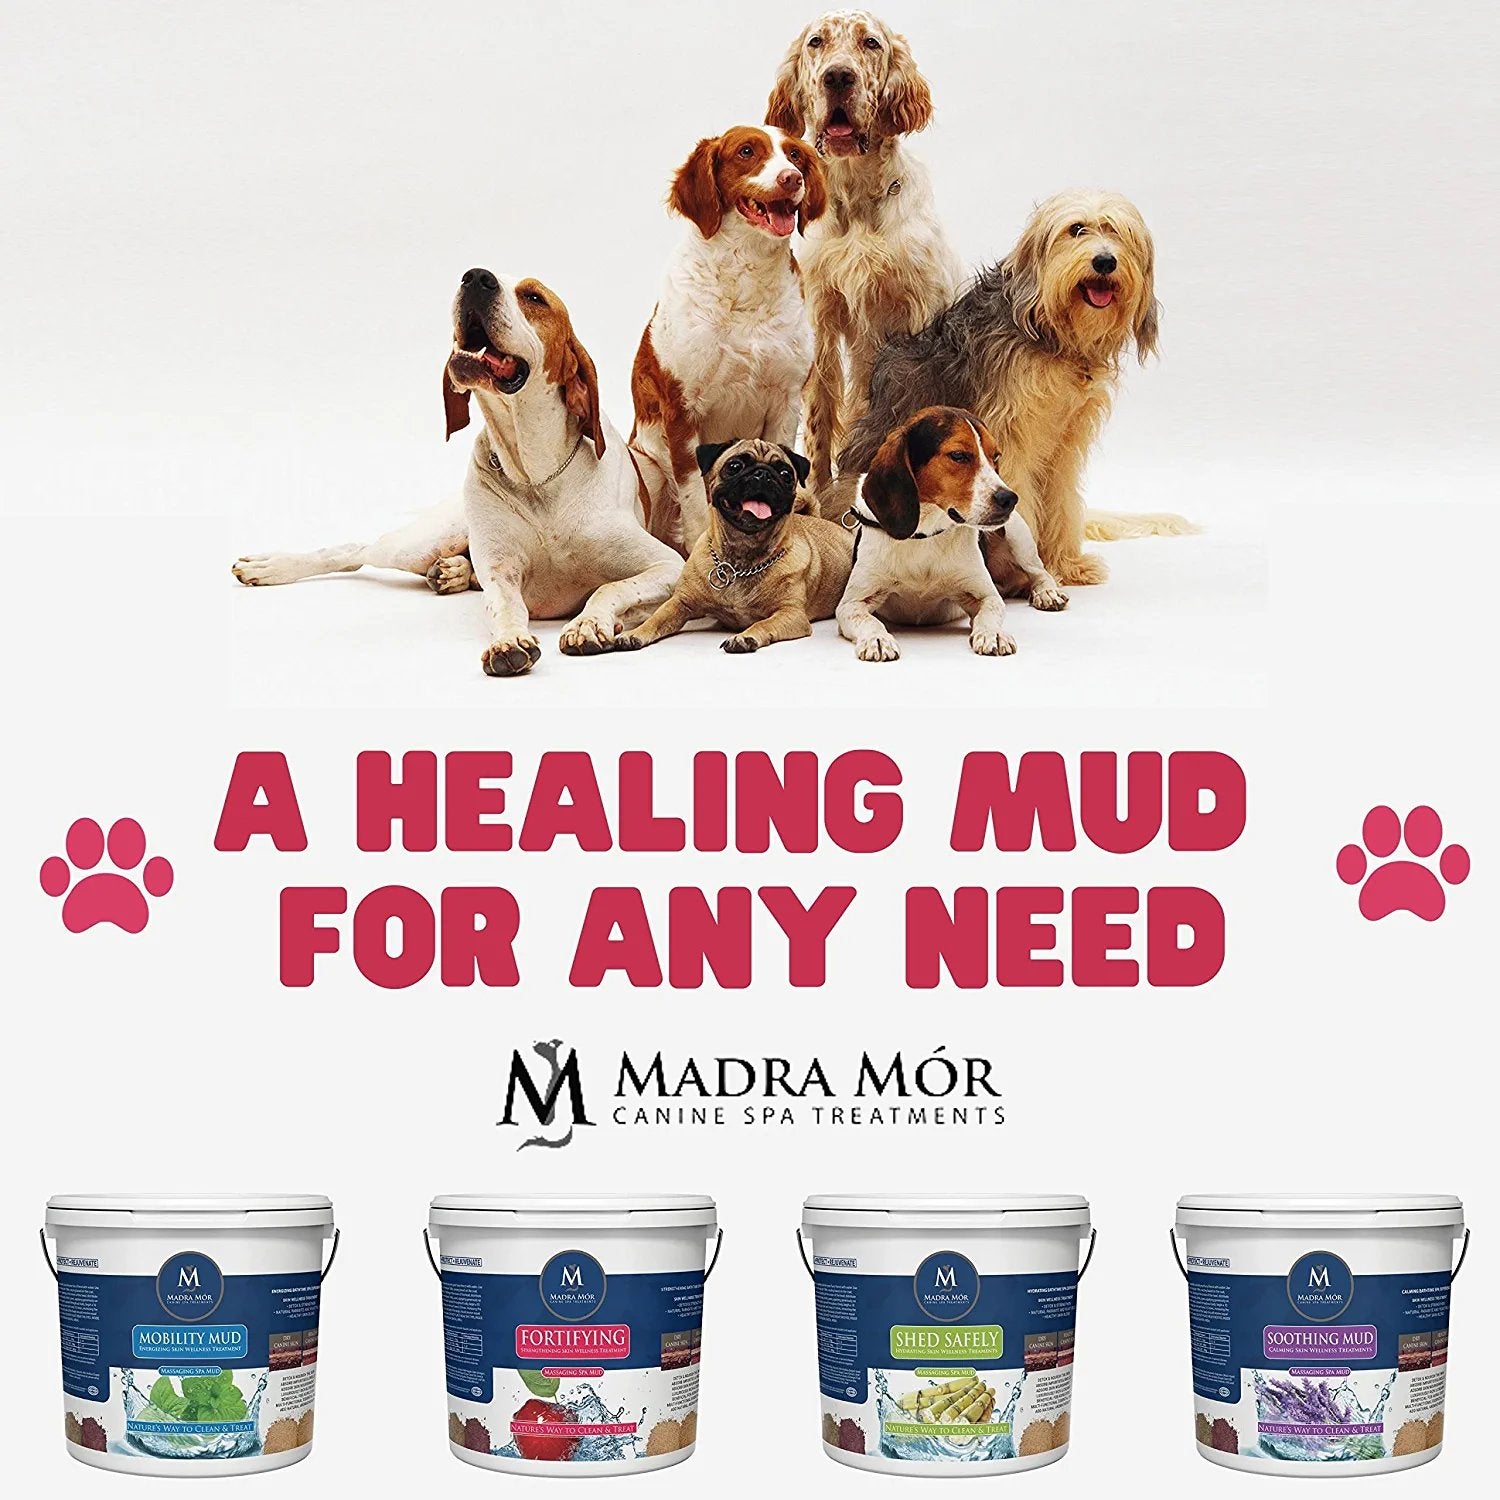 Madra Mor Dog Essentials Fortifying Spa Mud | Dog Wash | Dog Grooming | Dry Skin for Dogs Treatment | Dog Bath | Dog Coat Skin Care Products | 7.5lb Pail w Worldwide Nutrition Multi Purpose Key Chain